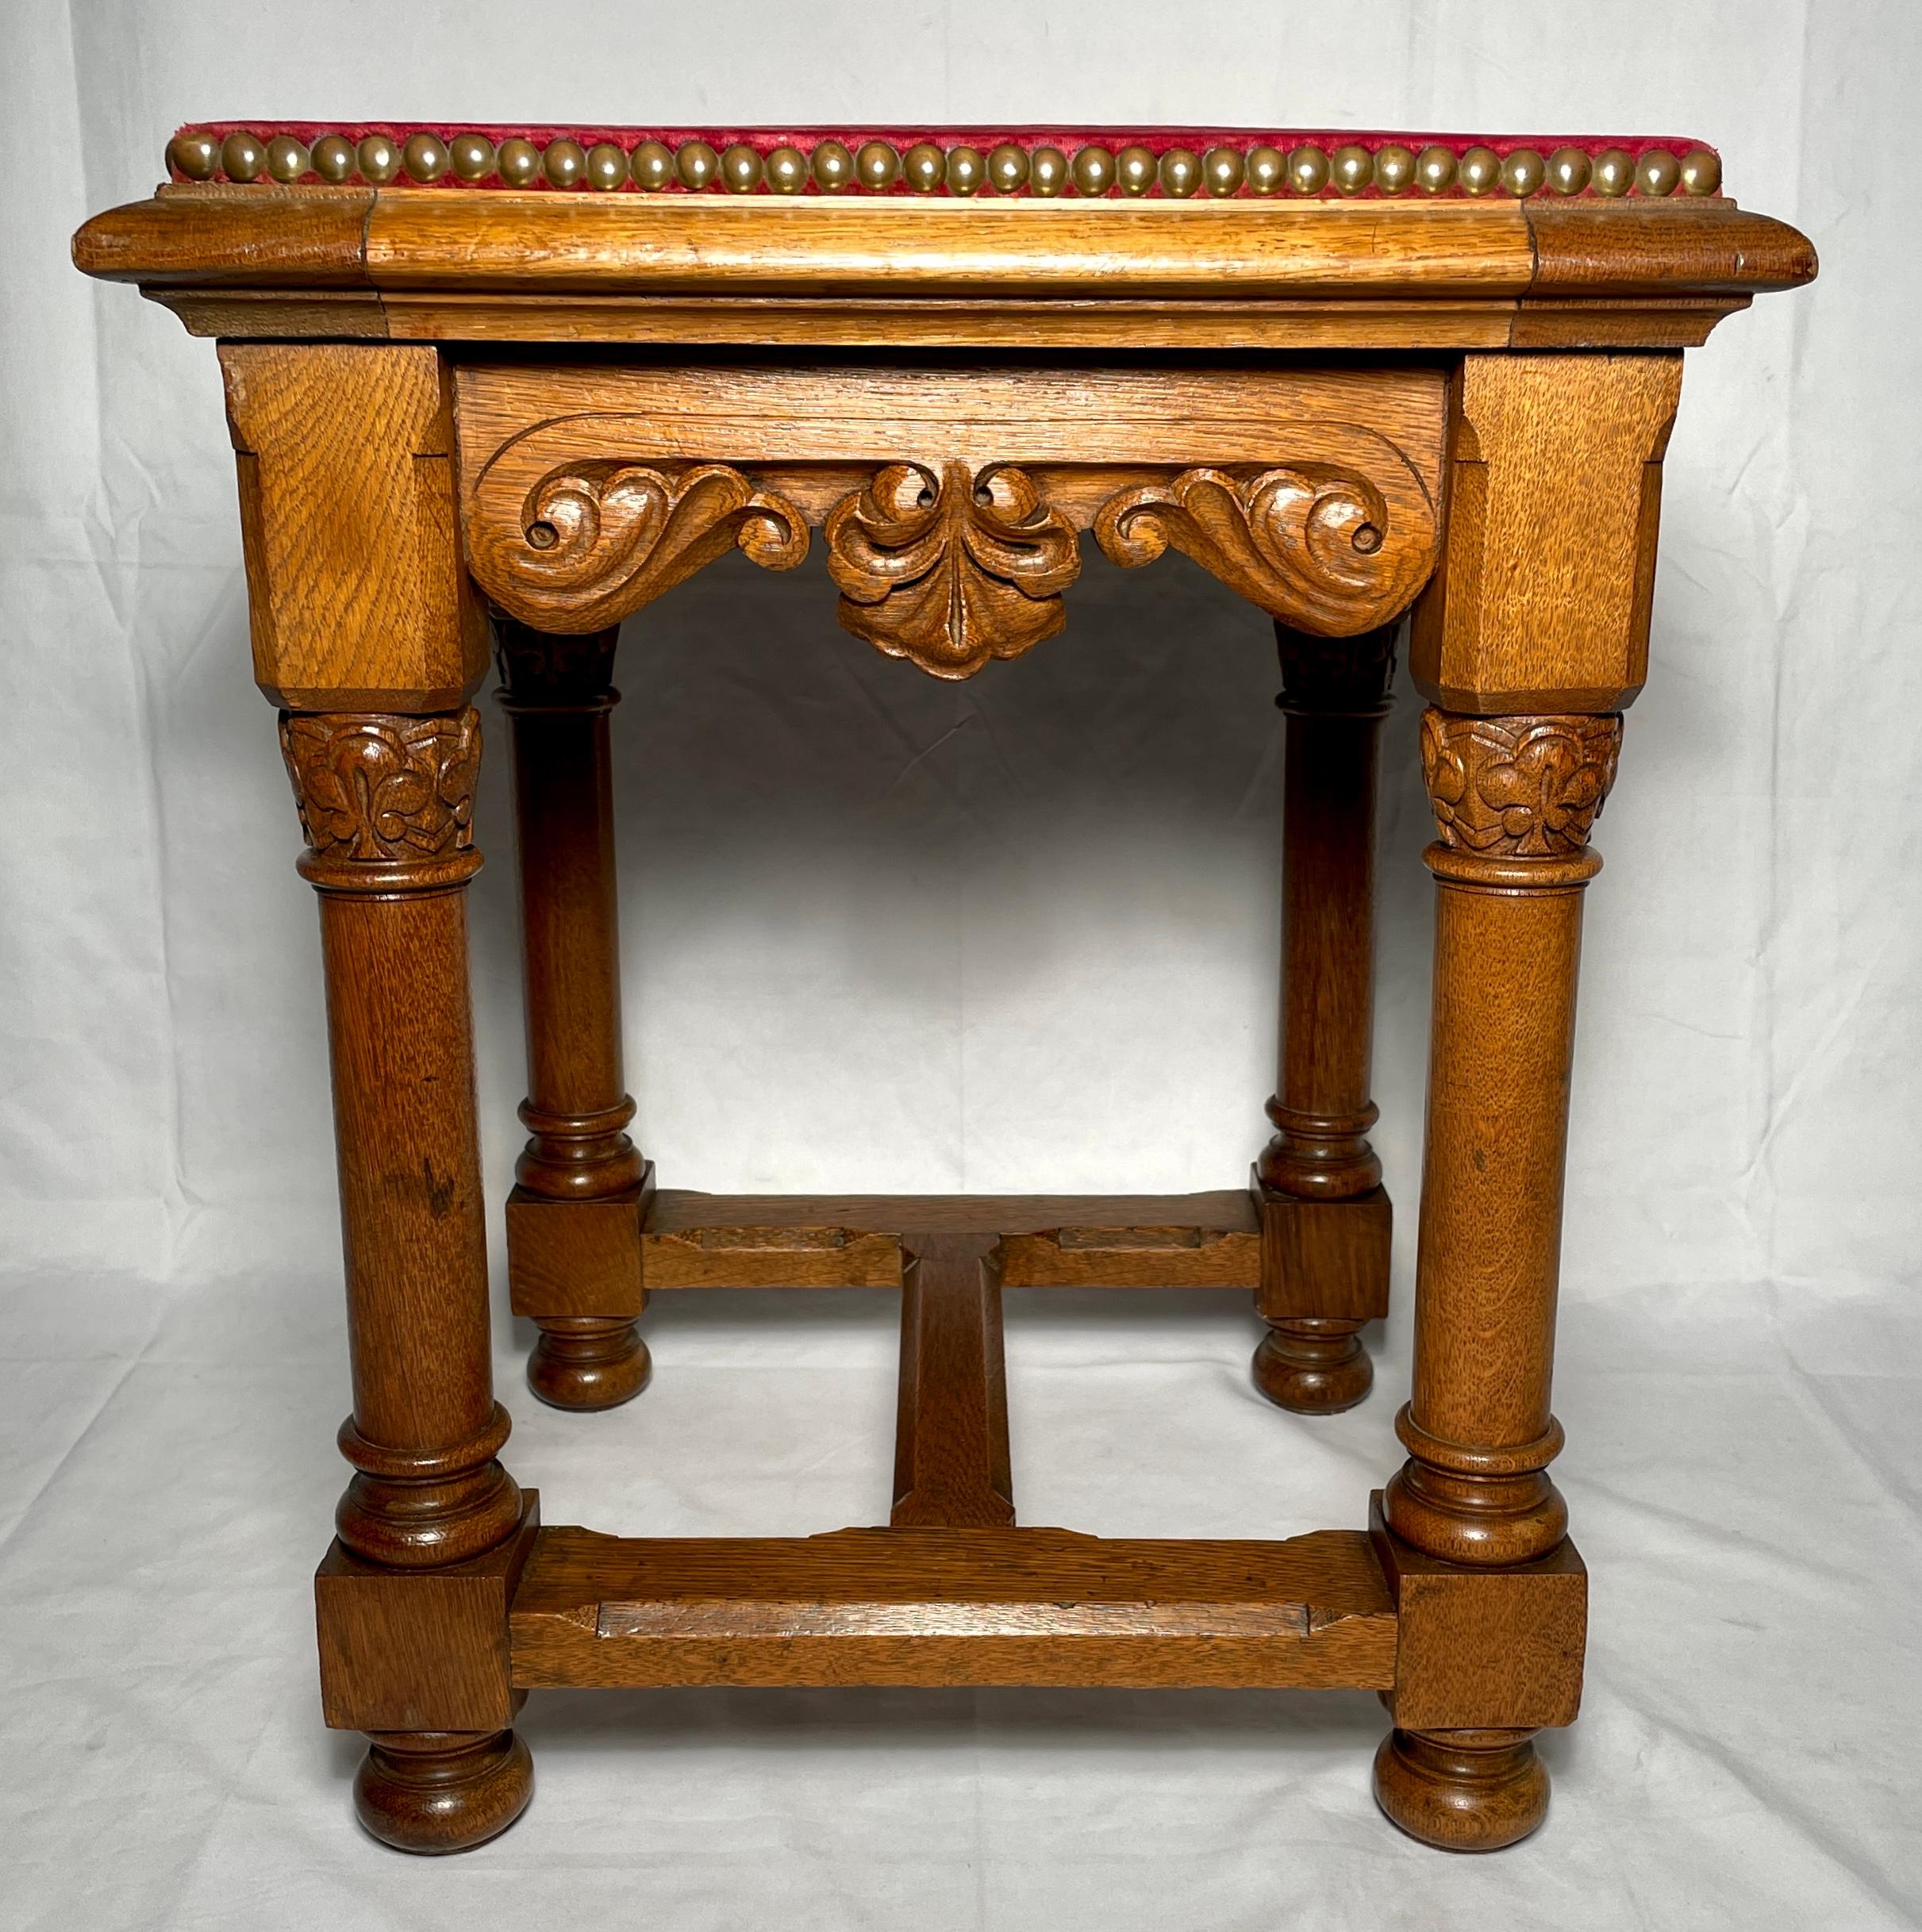 Antique French carved oak stool with red velvet seat and grommet detailing, circa 1900. There are 2 of these available. 